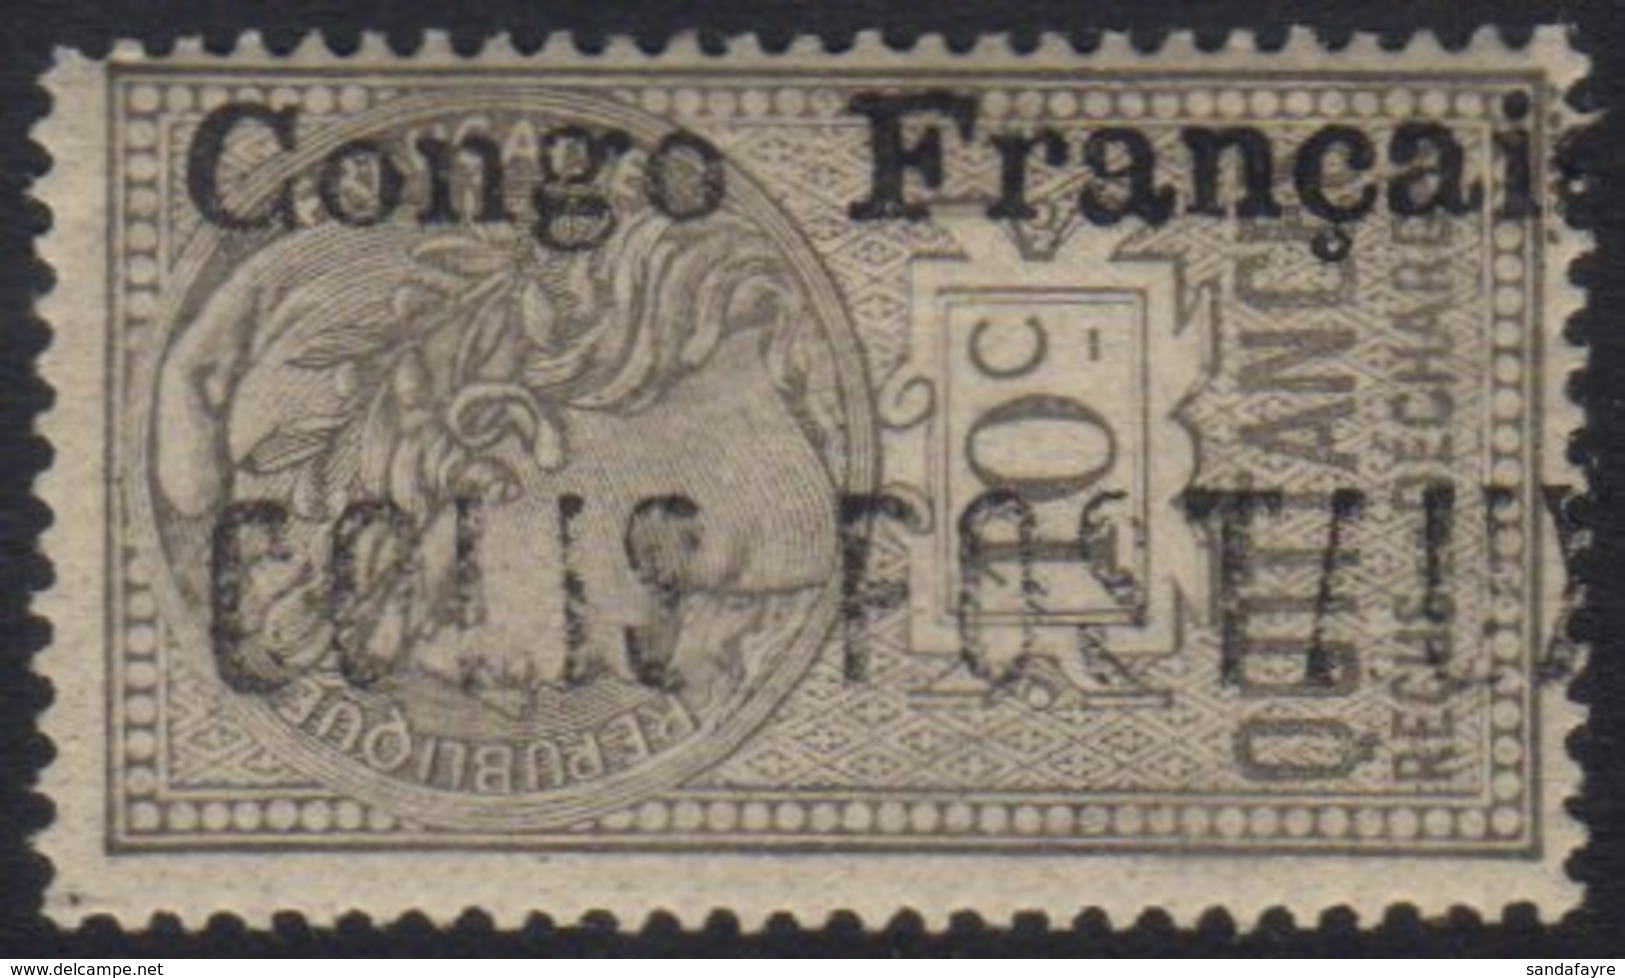 CONGO PARCEL POST 1893 10c Grey Fiscal With "Congo Francaise COLIS POSTAUX" Vertical Overprint Reading Downwards, Yvert  - Altri & Non Classificati